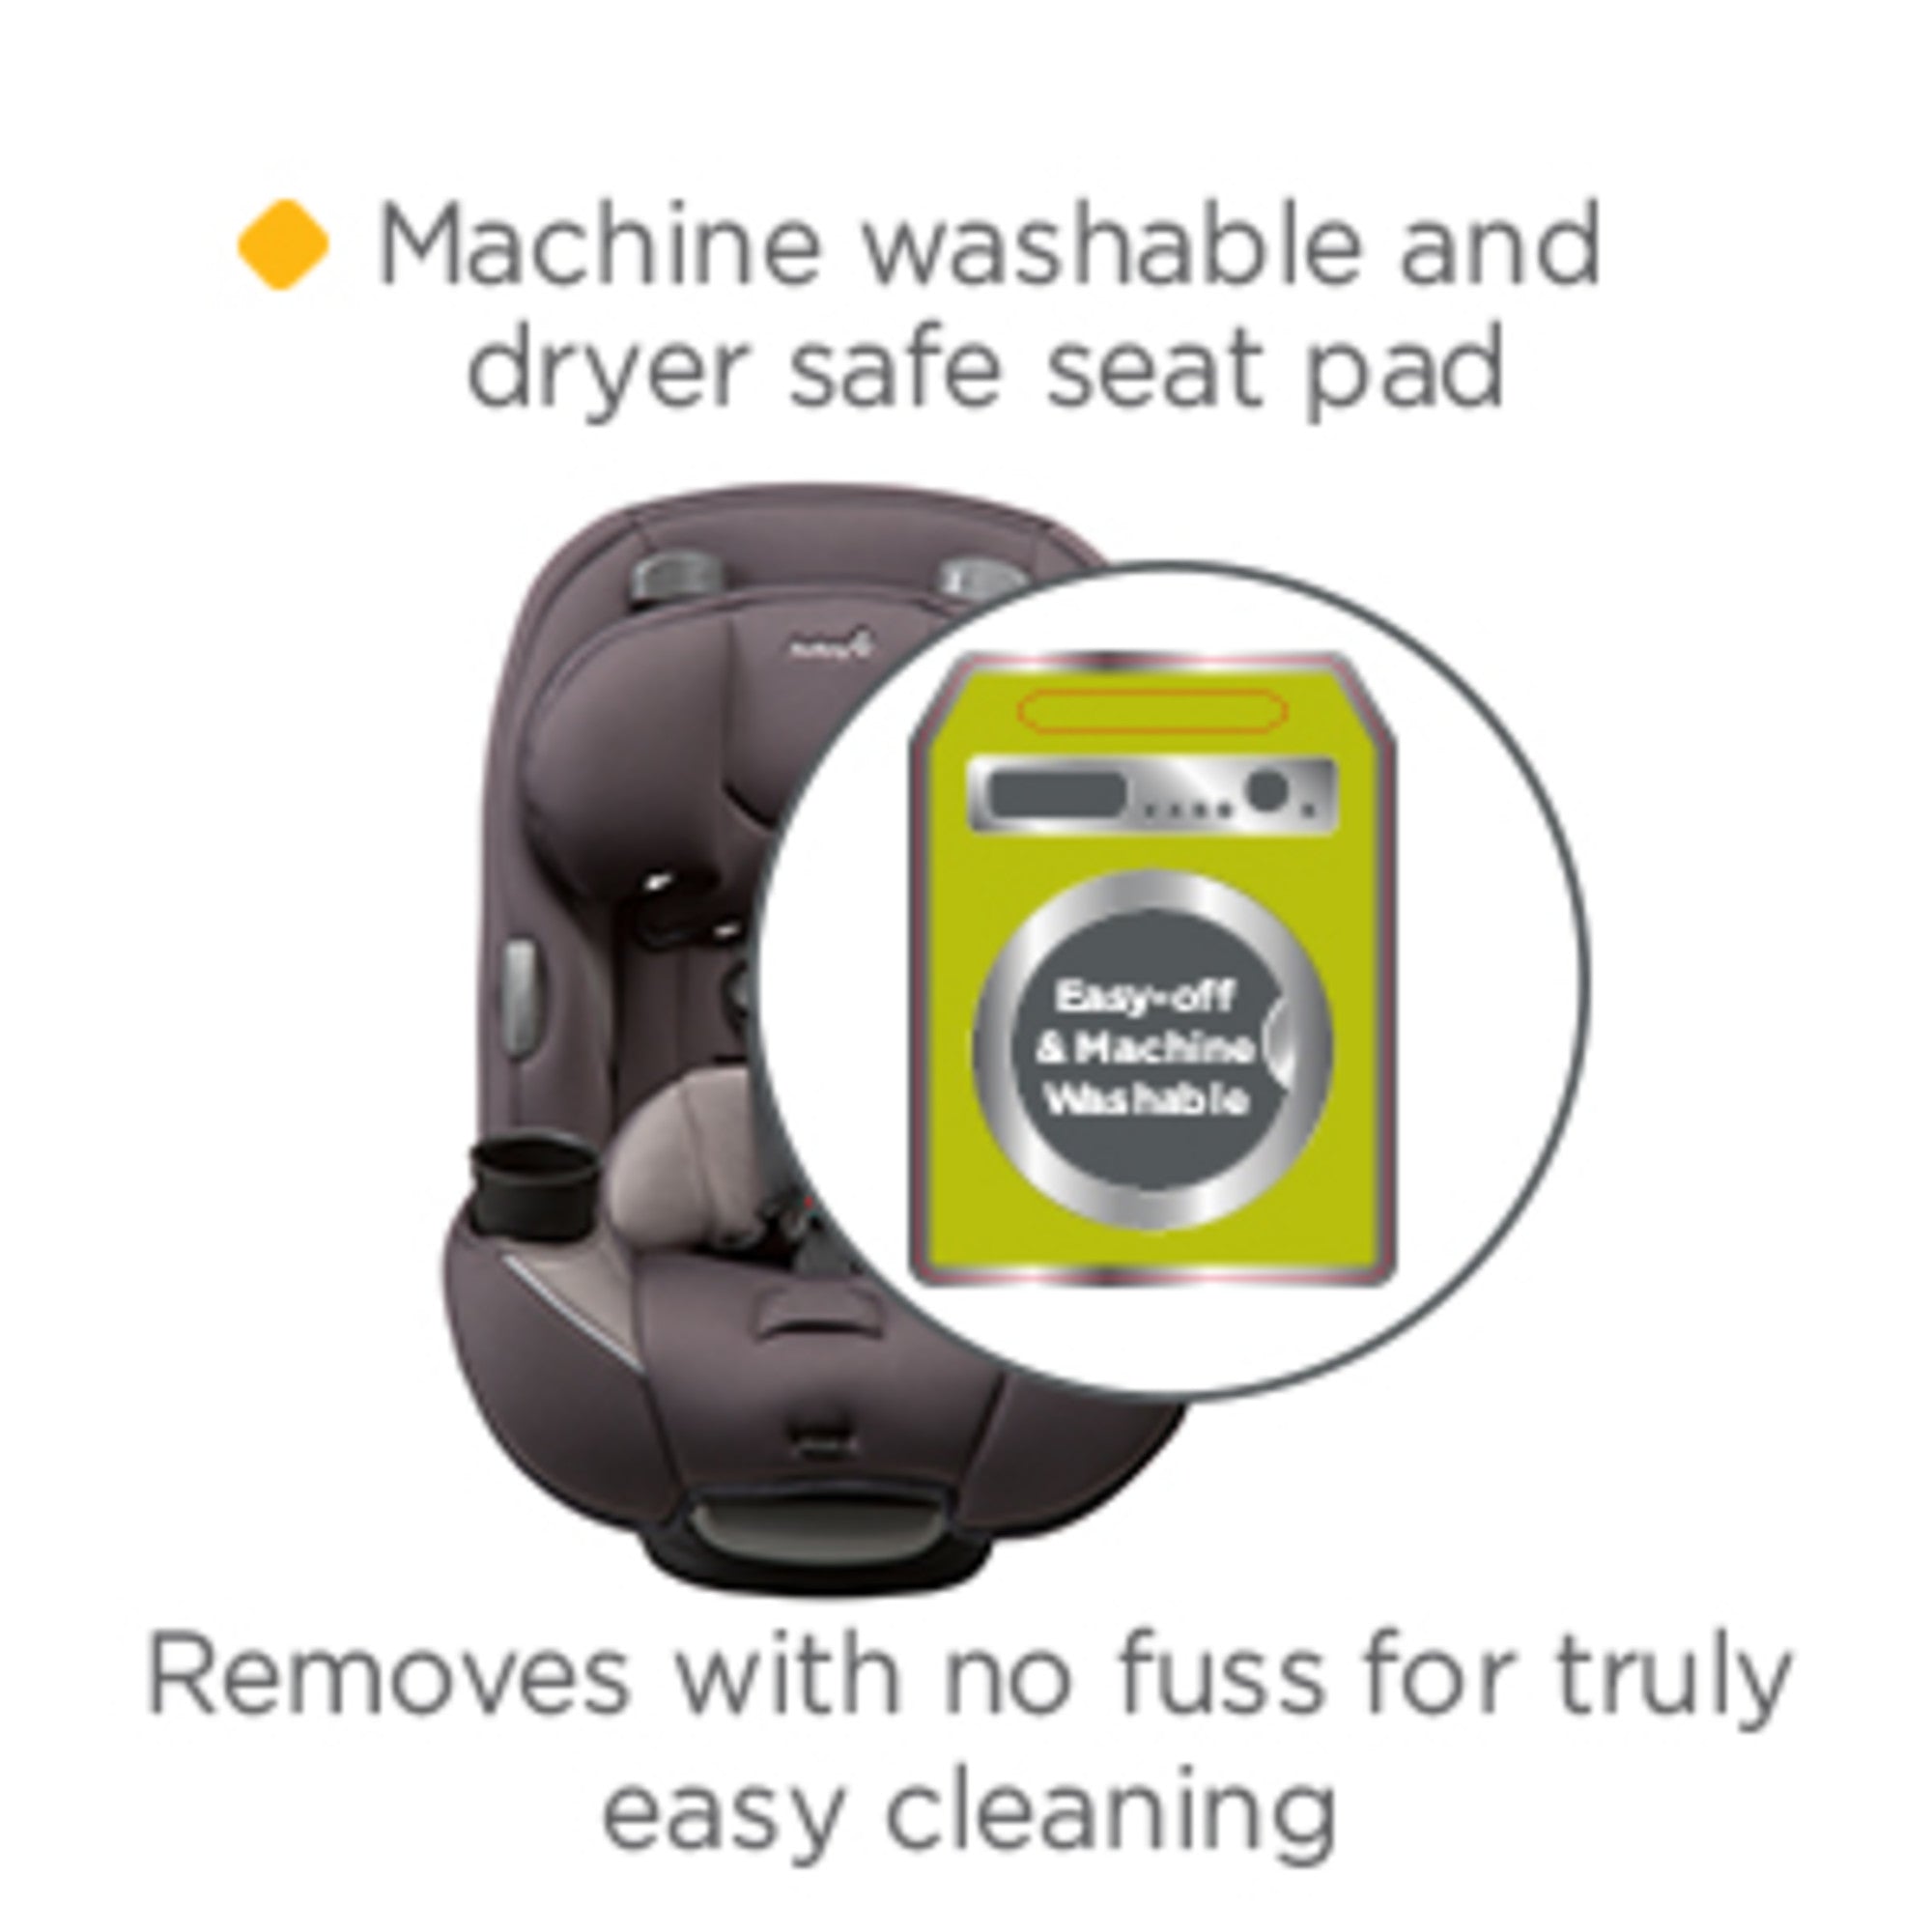 Car seat with machine washable and dryer safe seat pad. Removes with no fuss for truly easy cleaning.